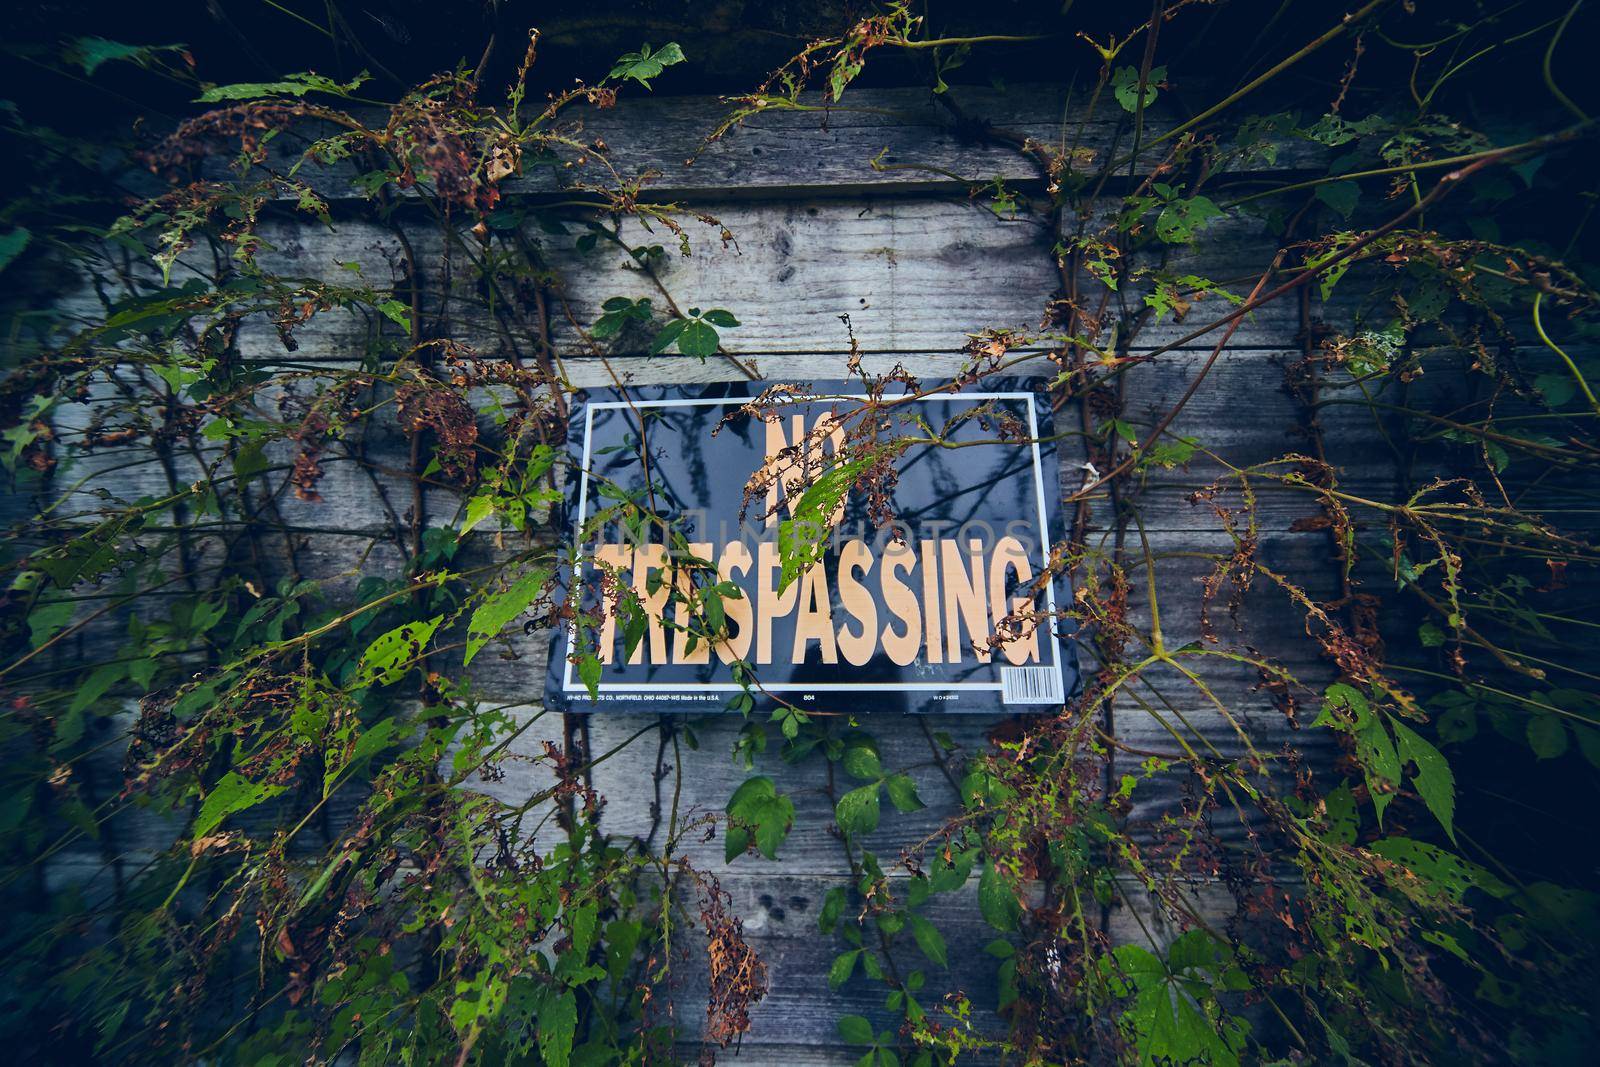 Image of No trespassing sign up close with vignette and wood panels covered in vines